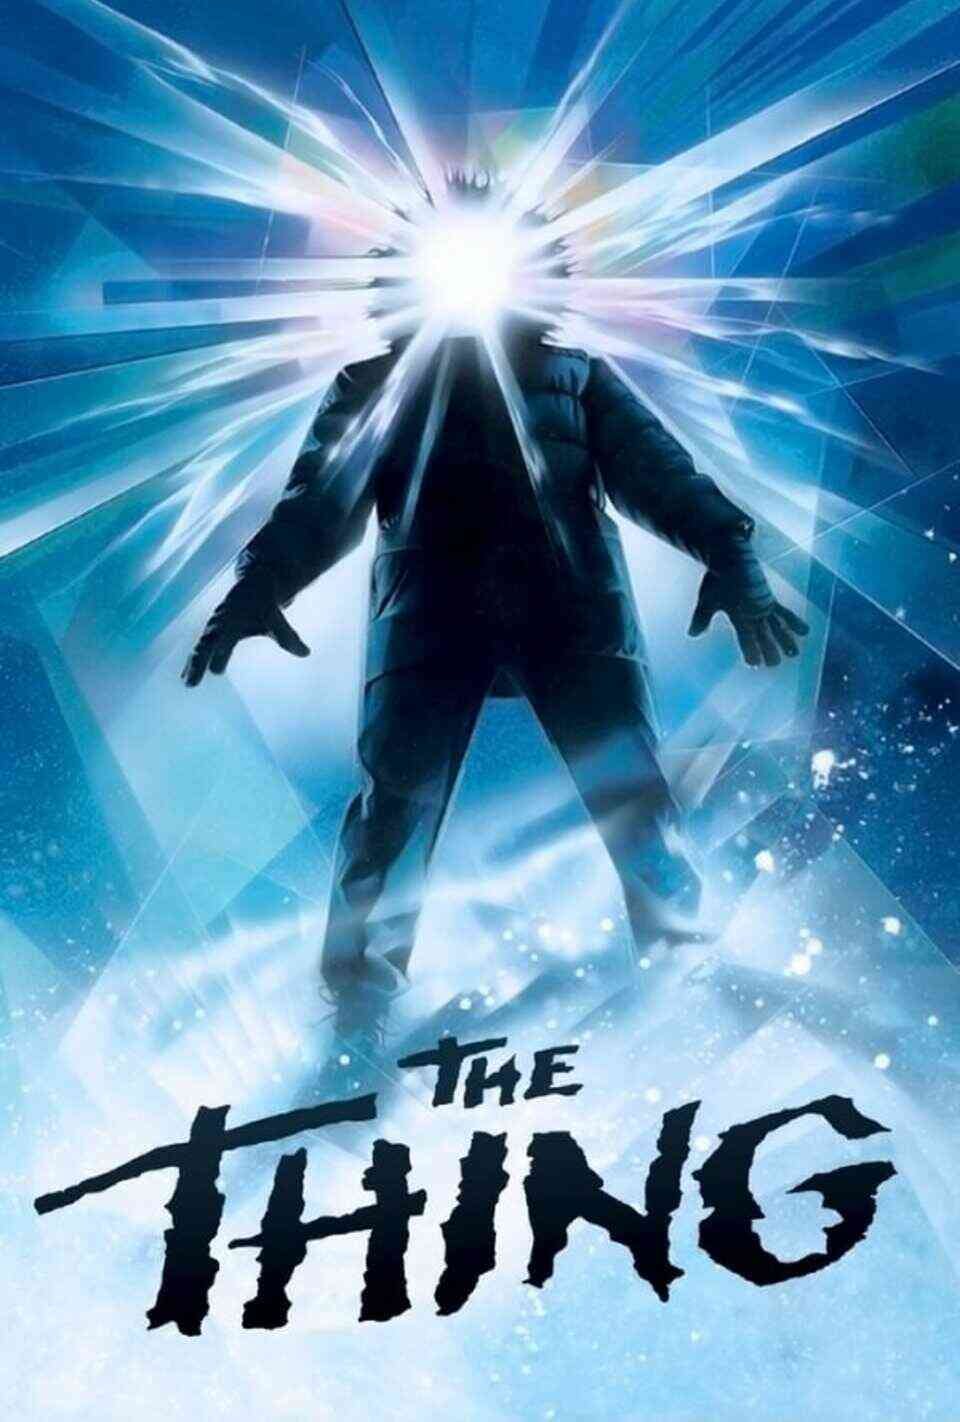 Read The Thing screenplay (poster)